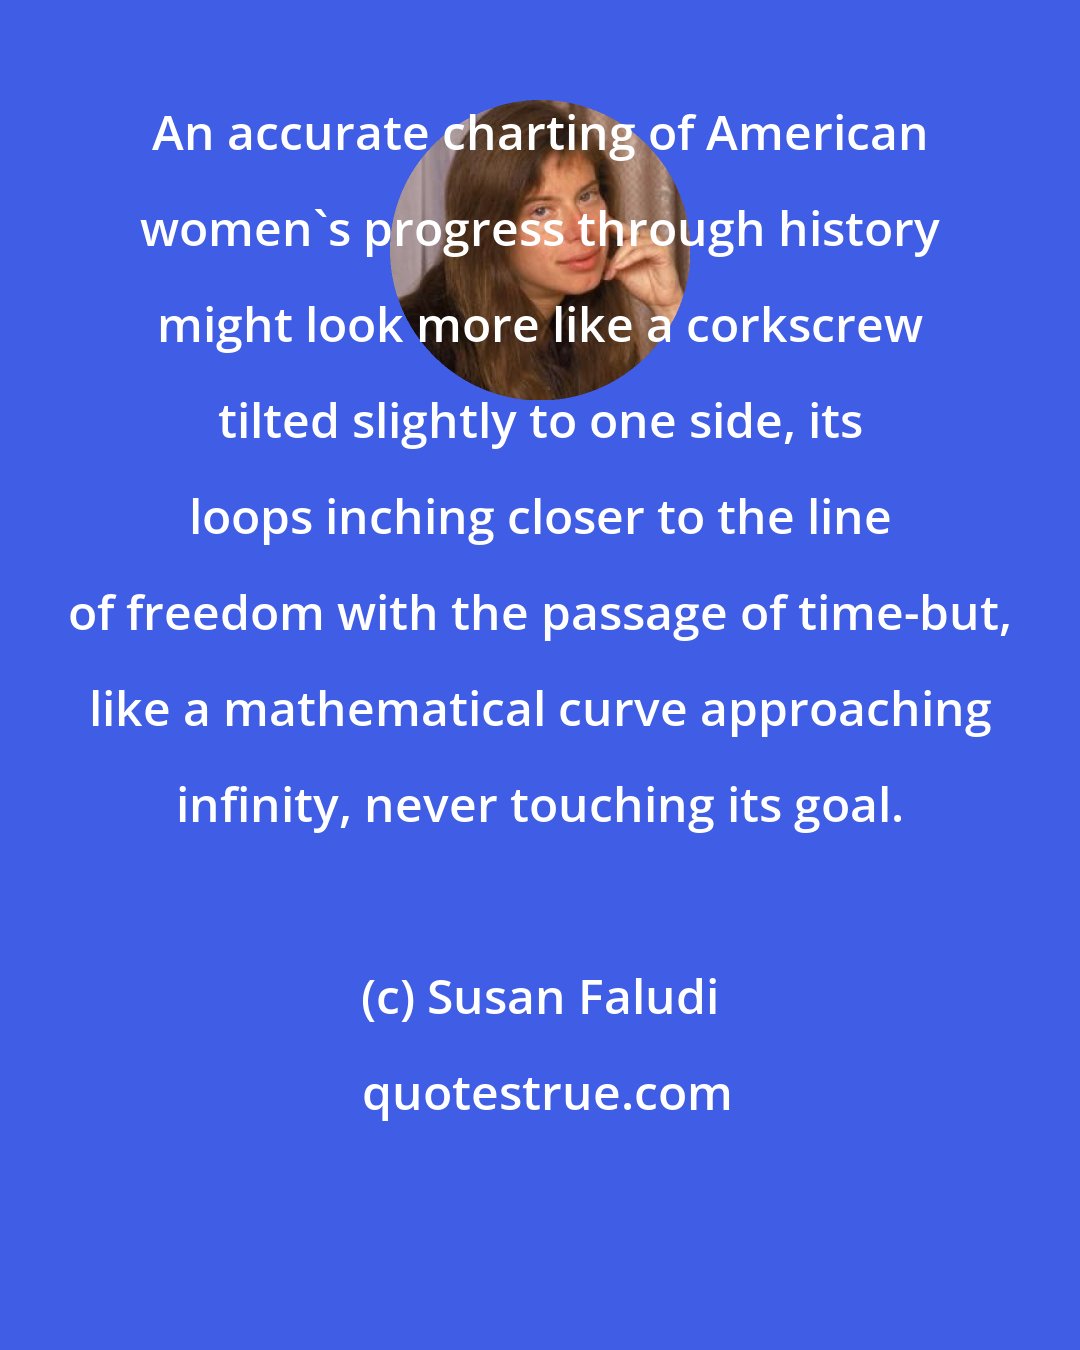 Susan Faludi: An accurate charting of American women's progress through history might look more like a corkscrew tilted slightly to one side, its loops inching closer to the line of freedom with the passage of time-but, like a mathematical curve approaching infinity, never touching its goal.